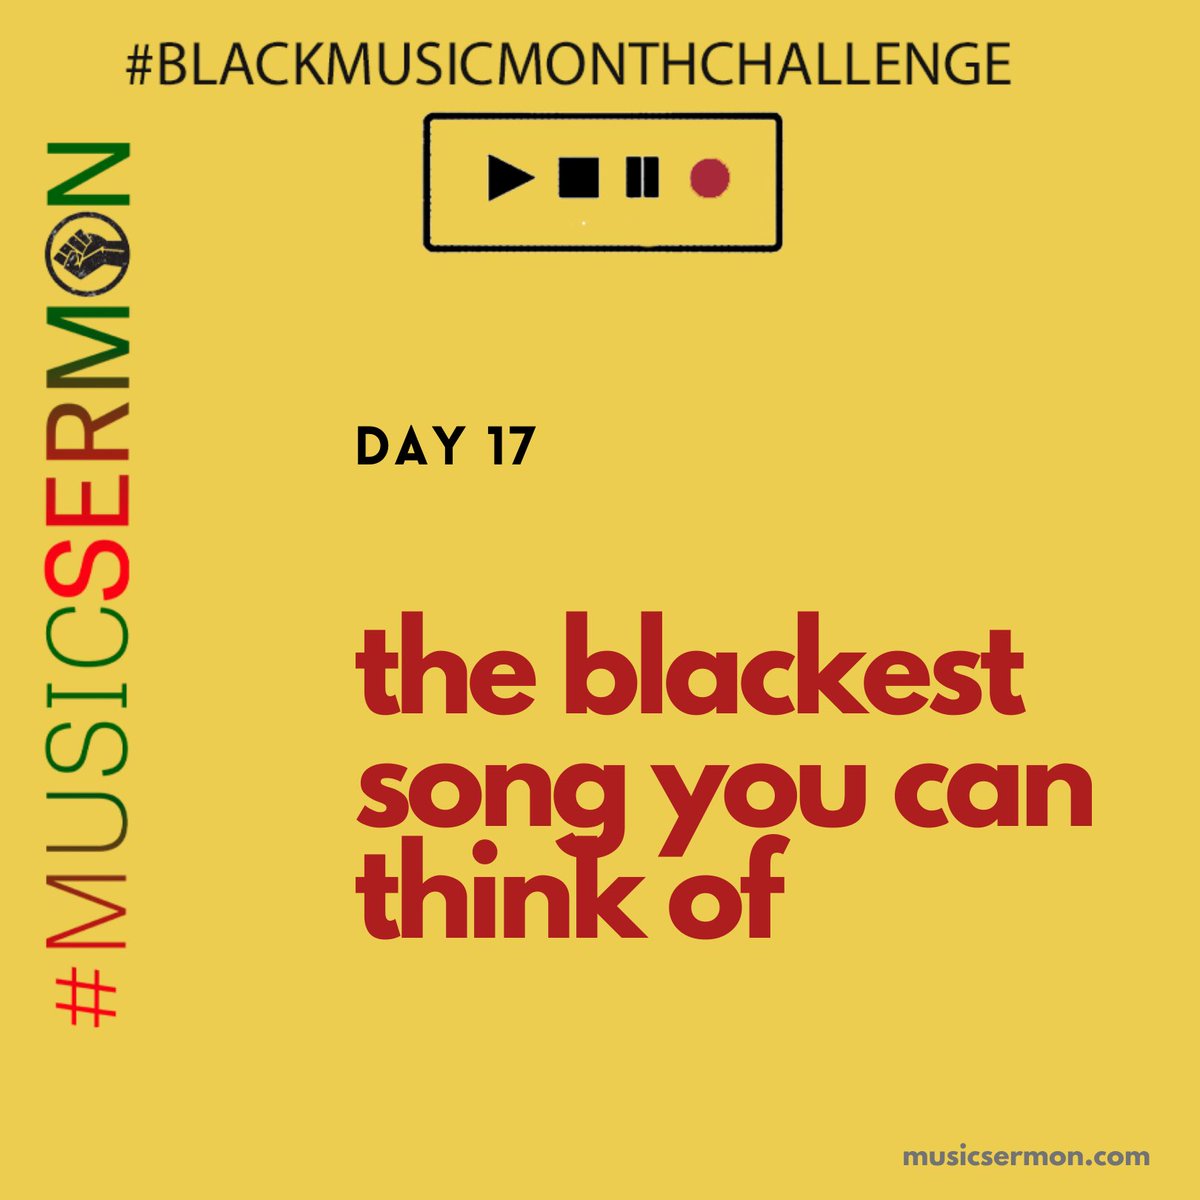 My feelings about the swift-approaching commercialization of  #Juneteenth   aside, I put this prompt here intentionally, bc Black music is an act of self-liberation. So for Day 17 of the  #BlackMusicMonthChallenge, share the BLACKEST song you can think of, sonically or lyrically.